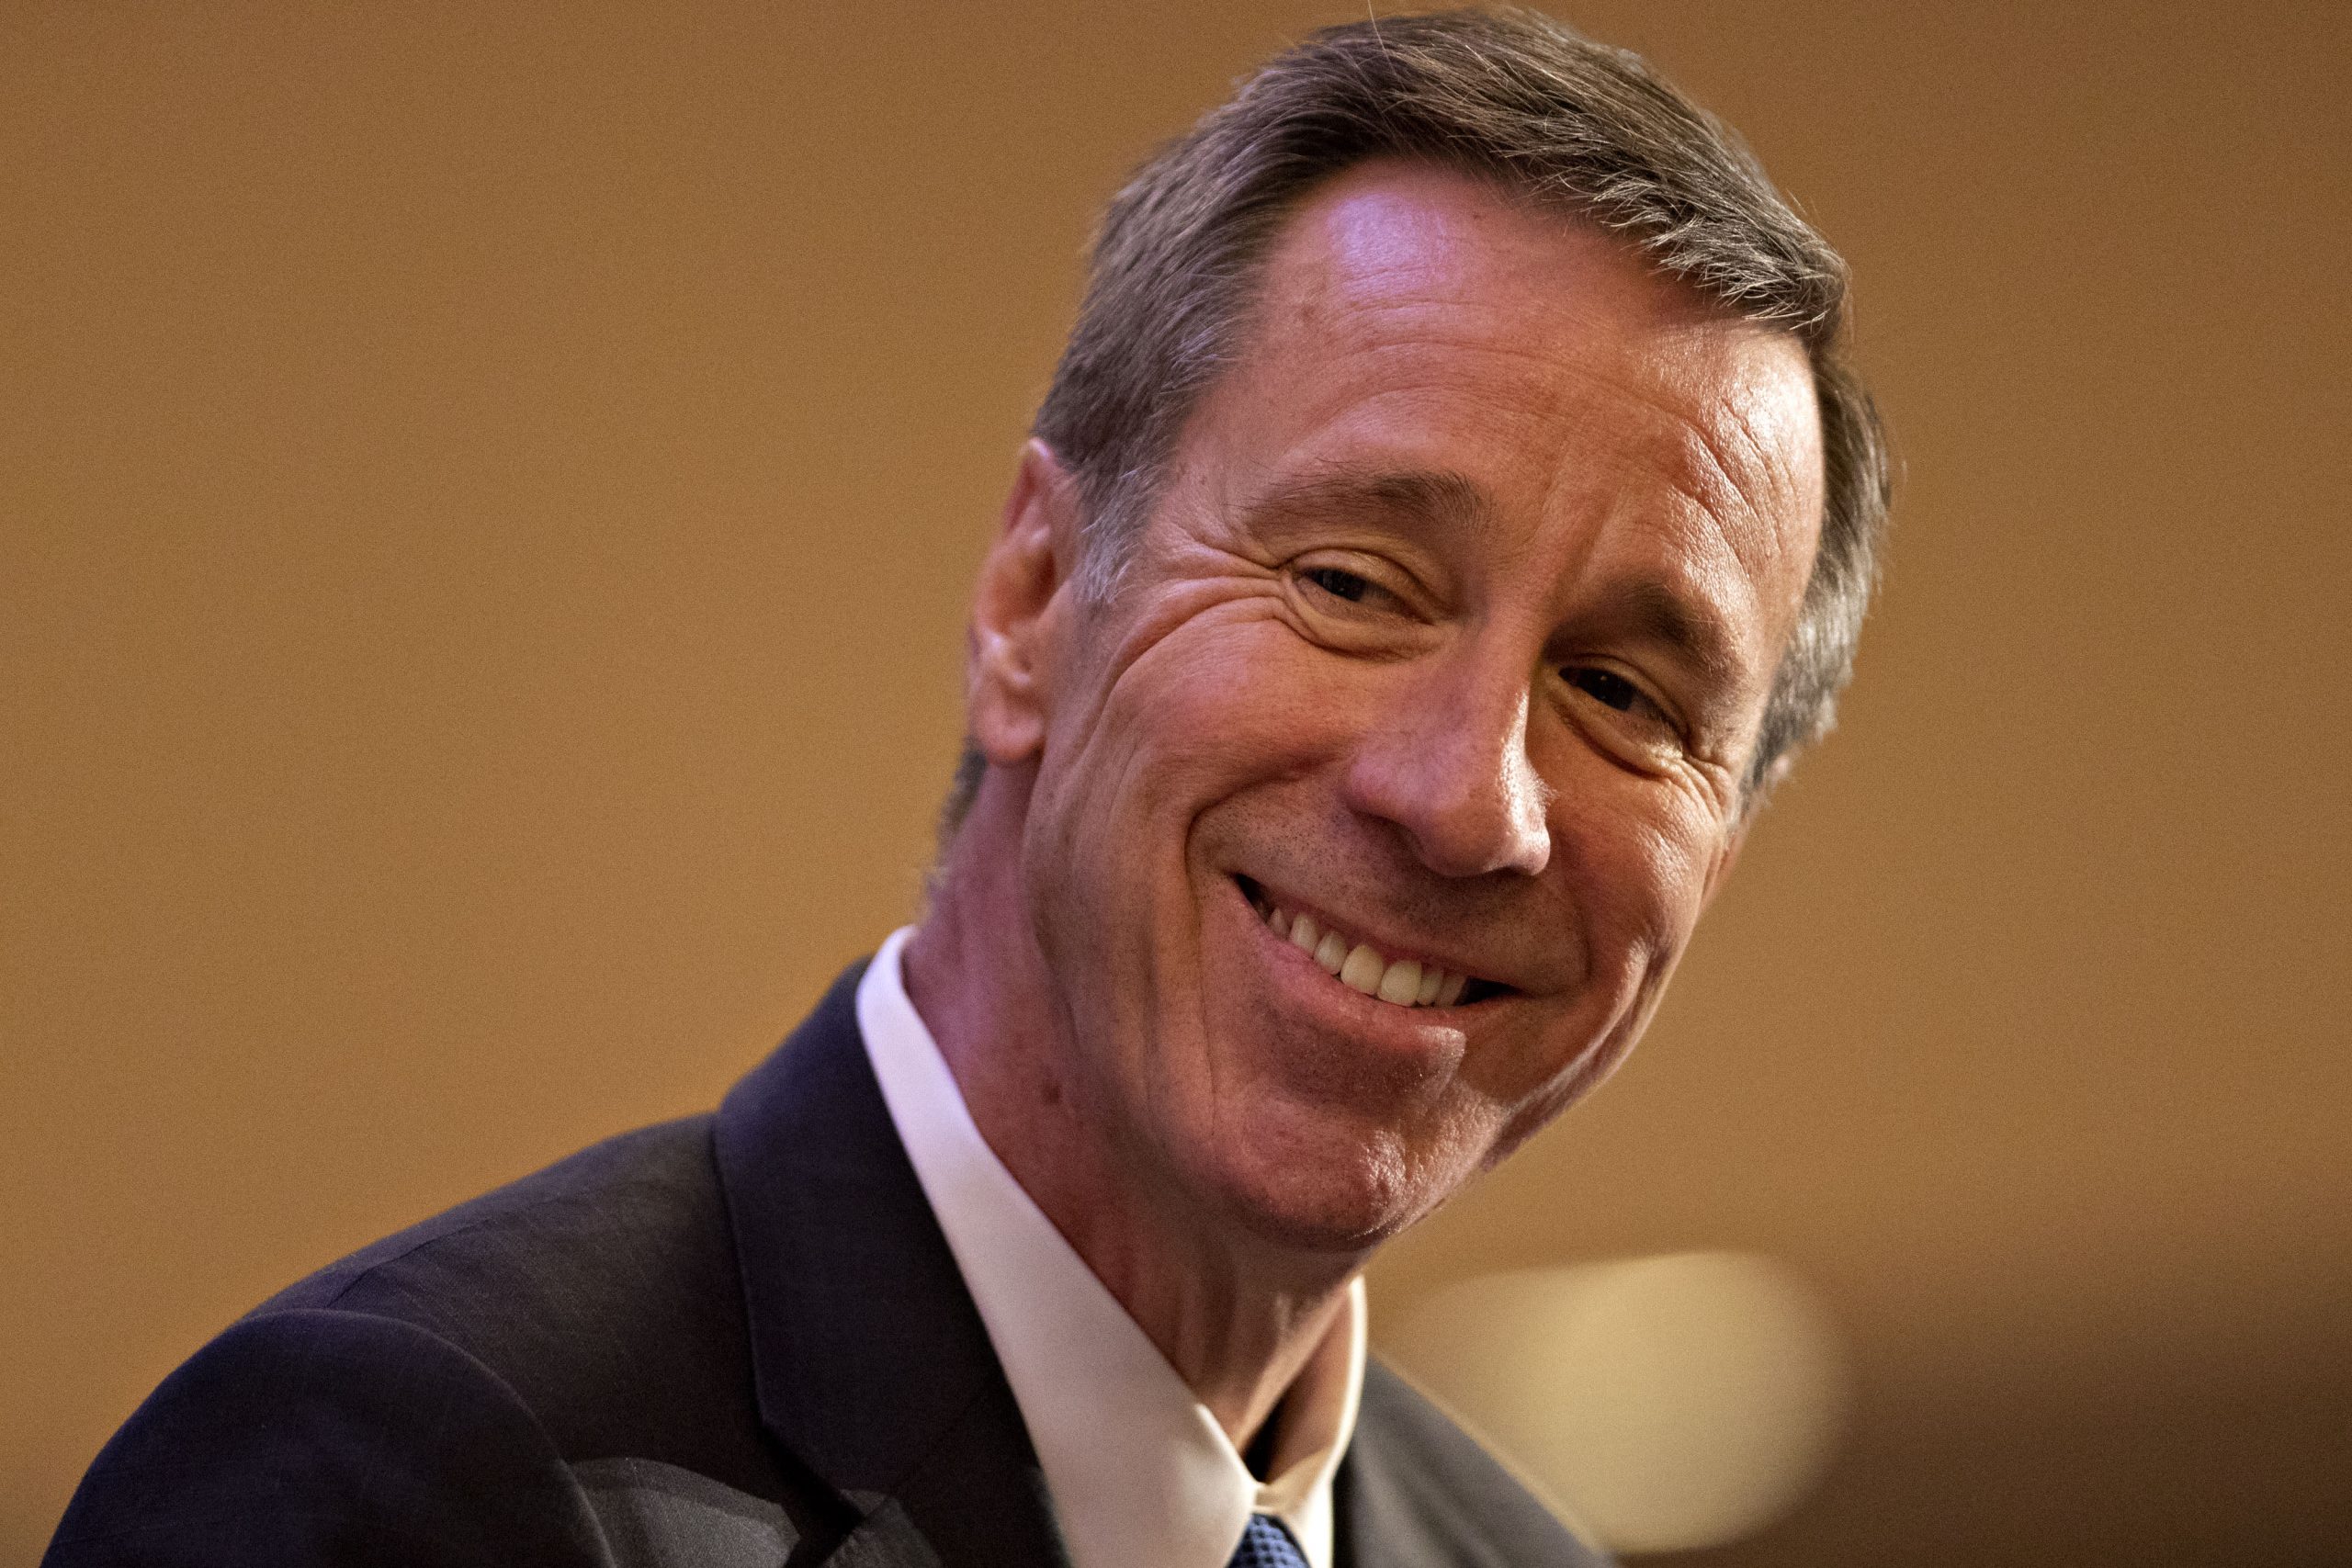 Marriott CEO Arne Sorenson dies after battle with most cancers